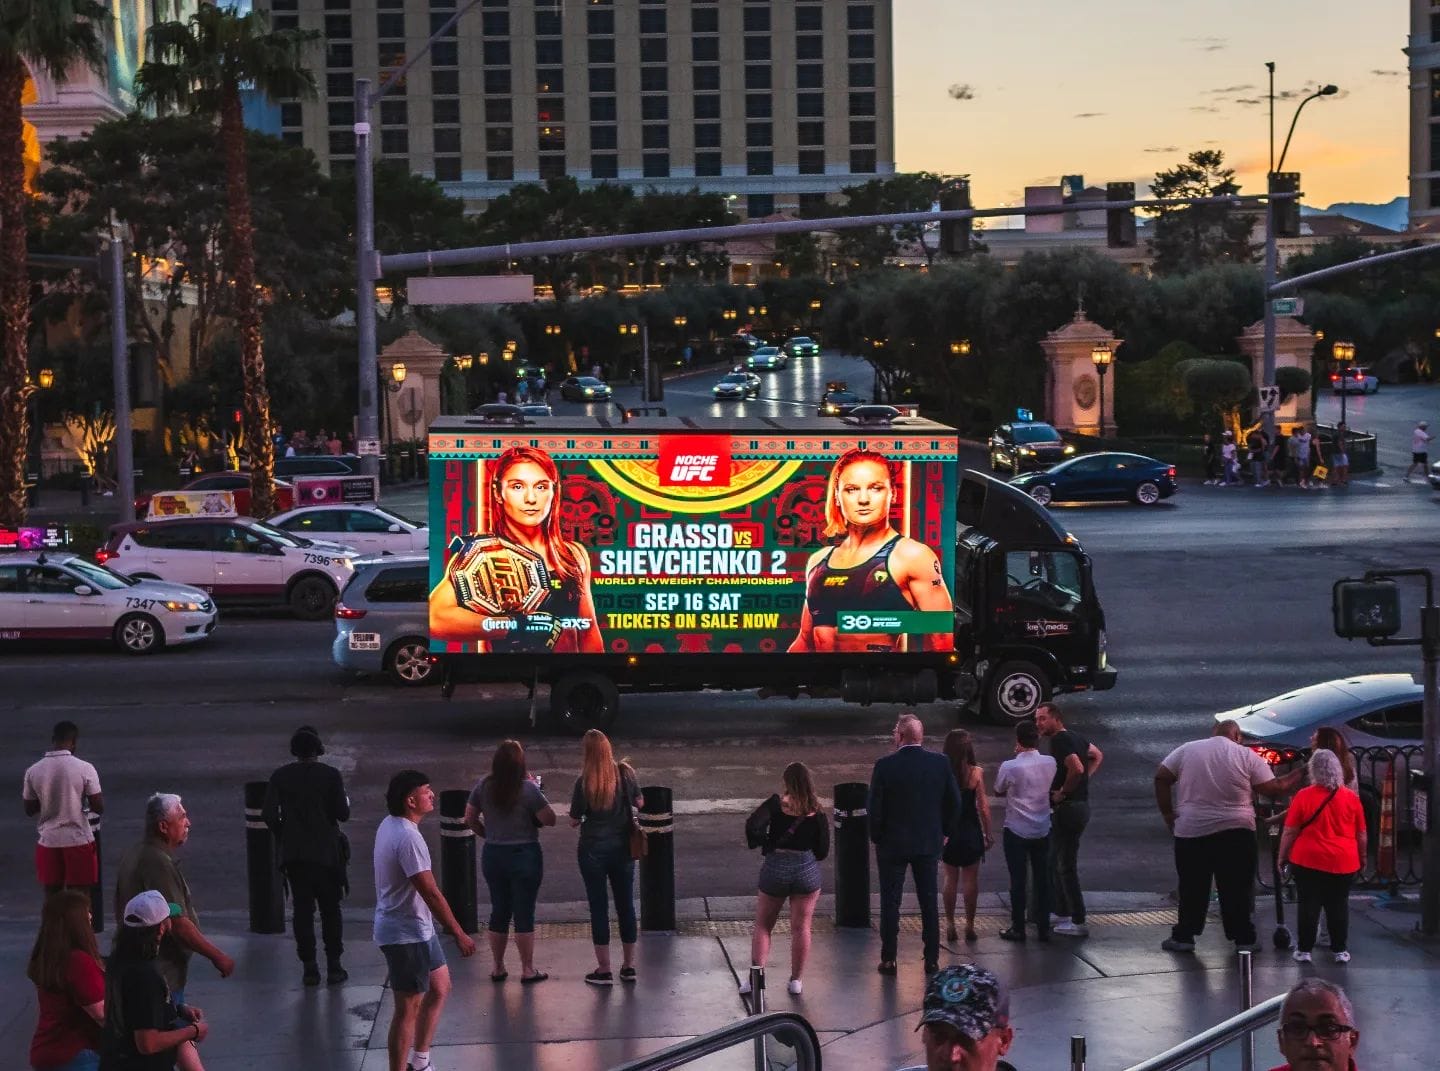 Advertising truck displaying fight event in city at dusk.